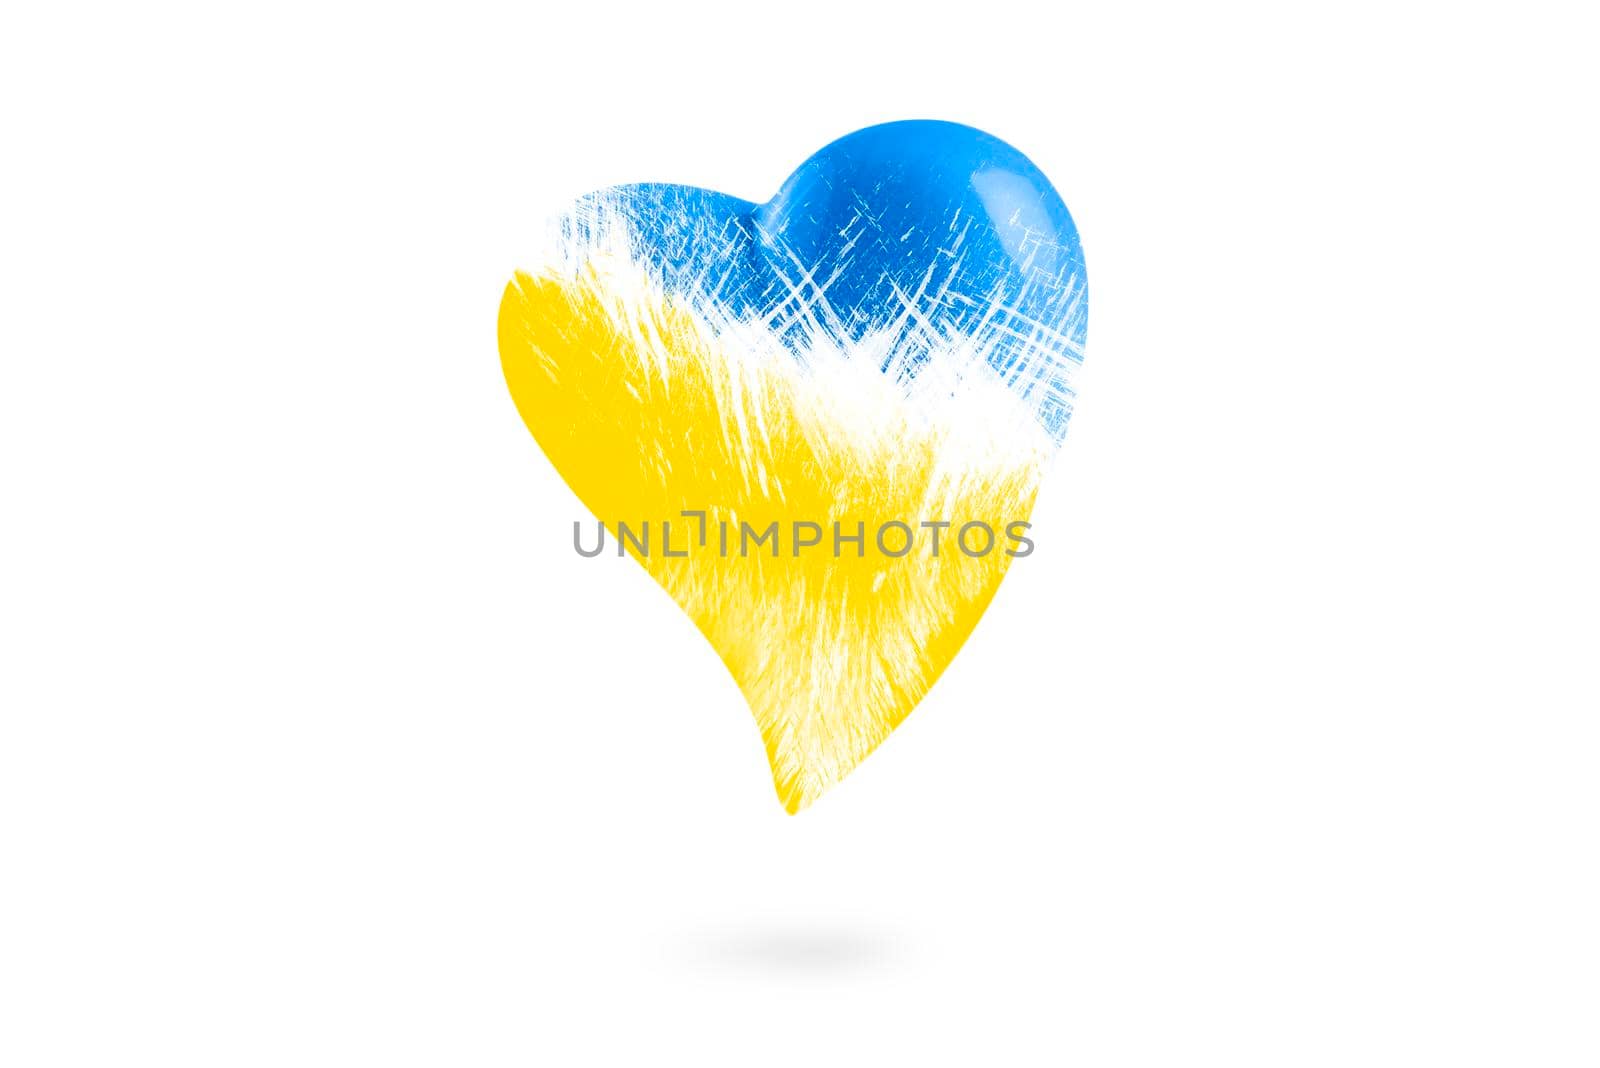 No war in Ukraine. Broken blue-yellow heart on a white isolated background. Save Ukraine. The heart is painted in the colors of the Ukrainian flag - blue and yellow. by SERSOL